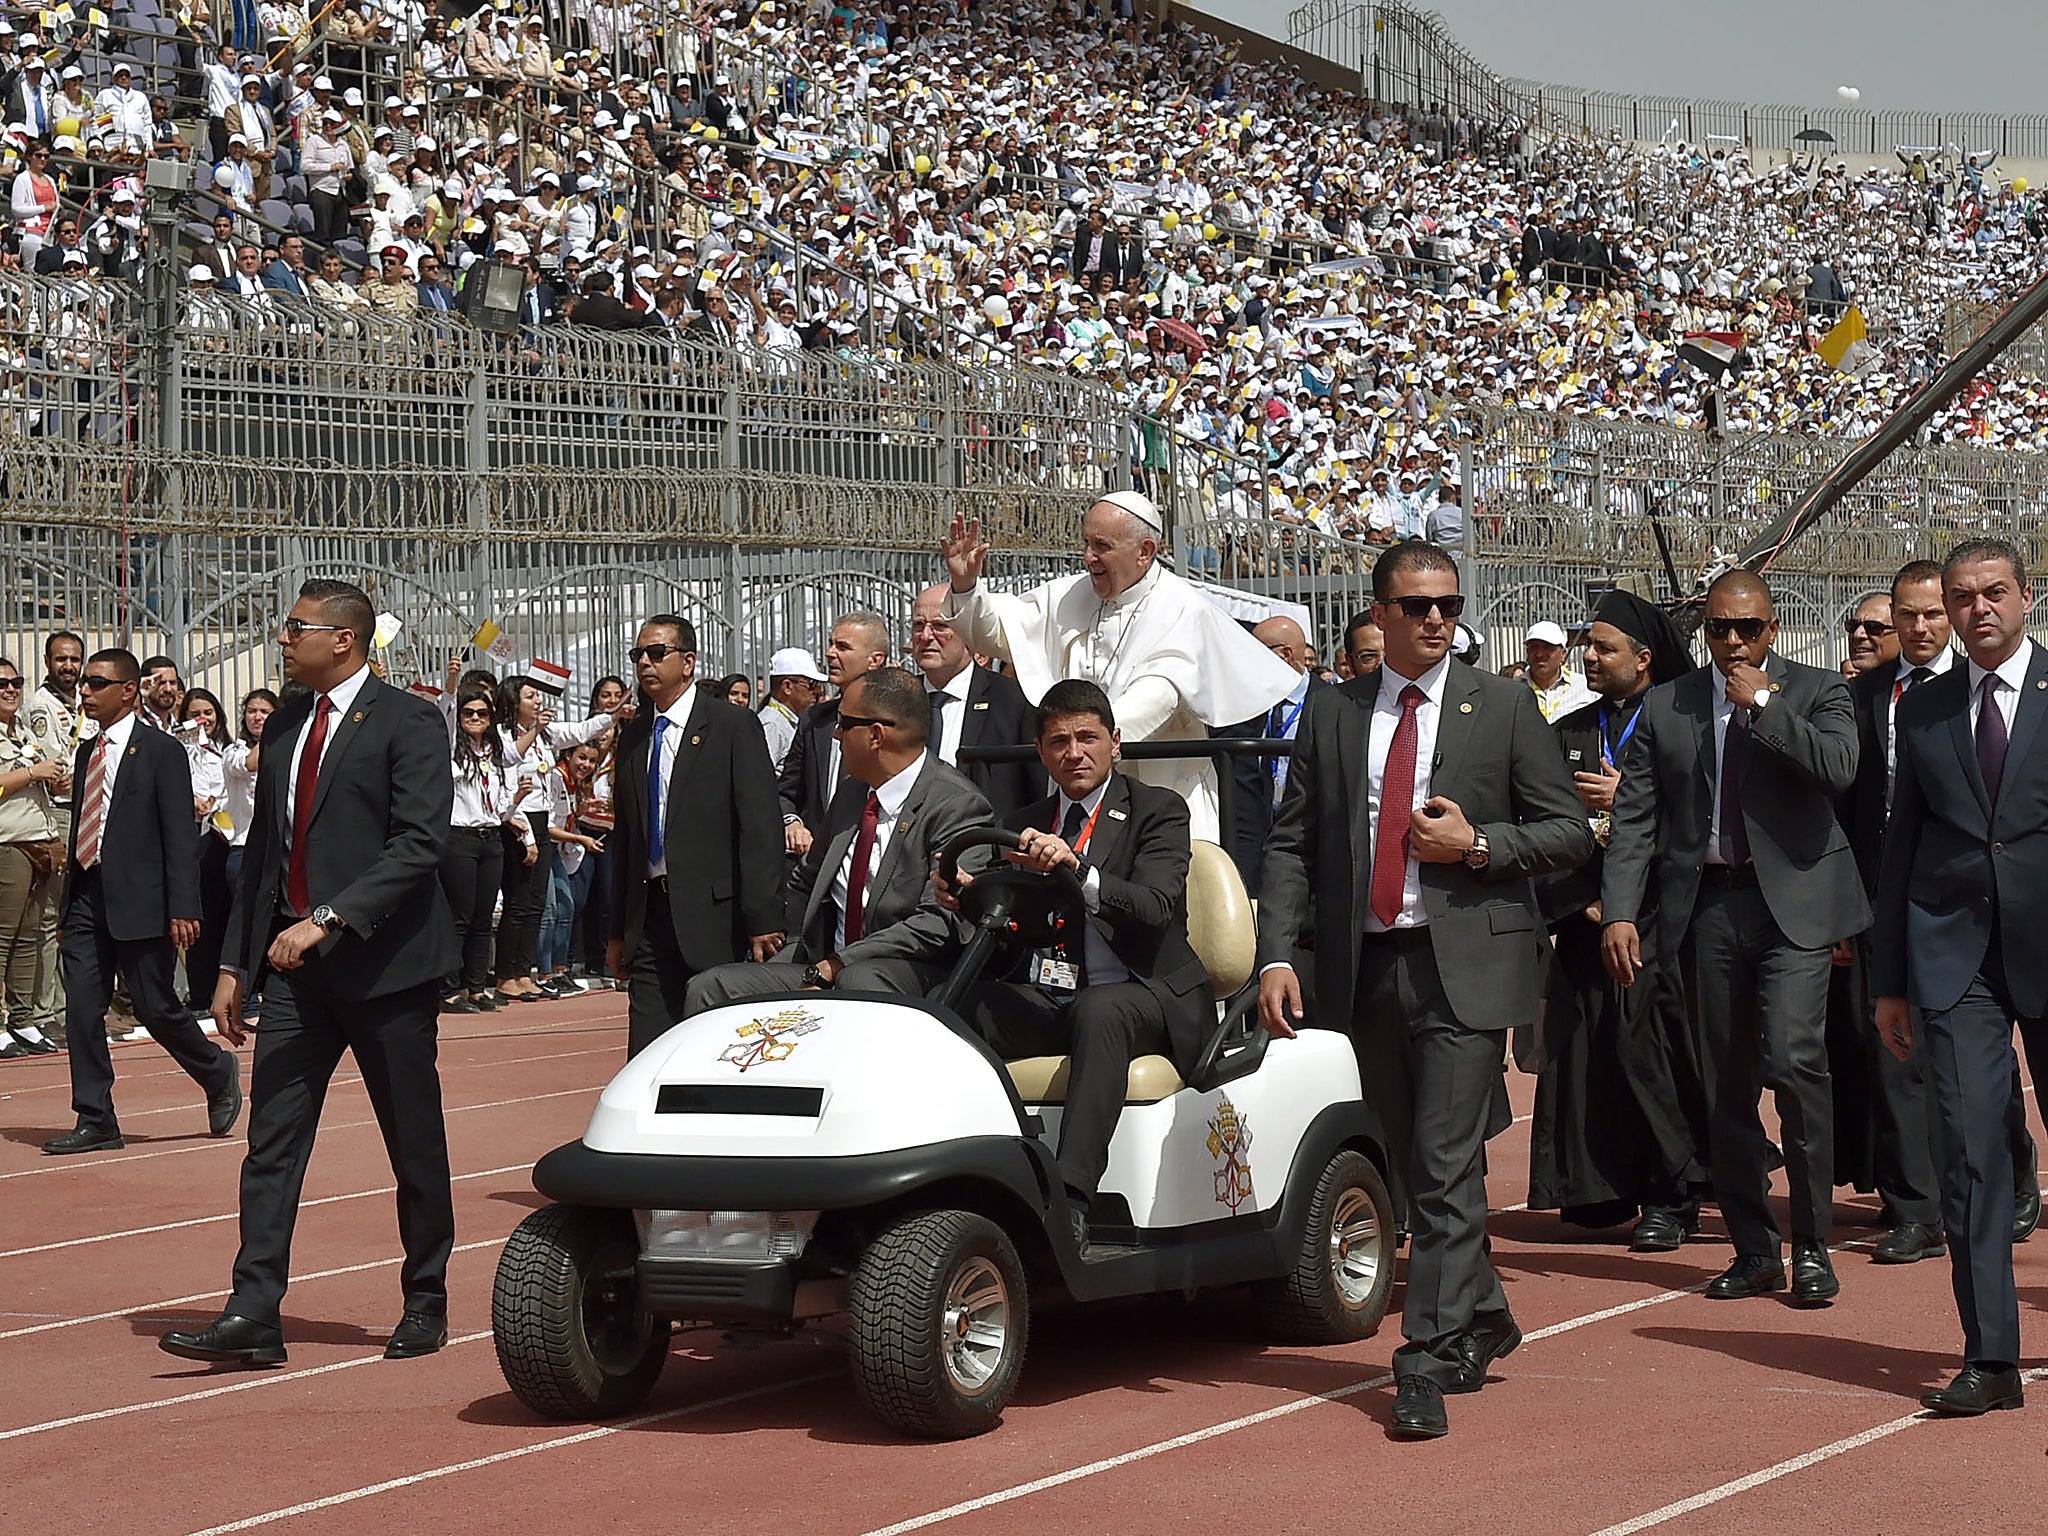 Pope Francis is surrounded by security as he rides an uncovered Popemobile before the start of a mass at a stadium in Cairo